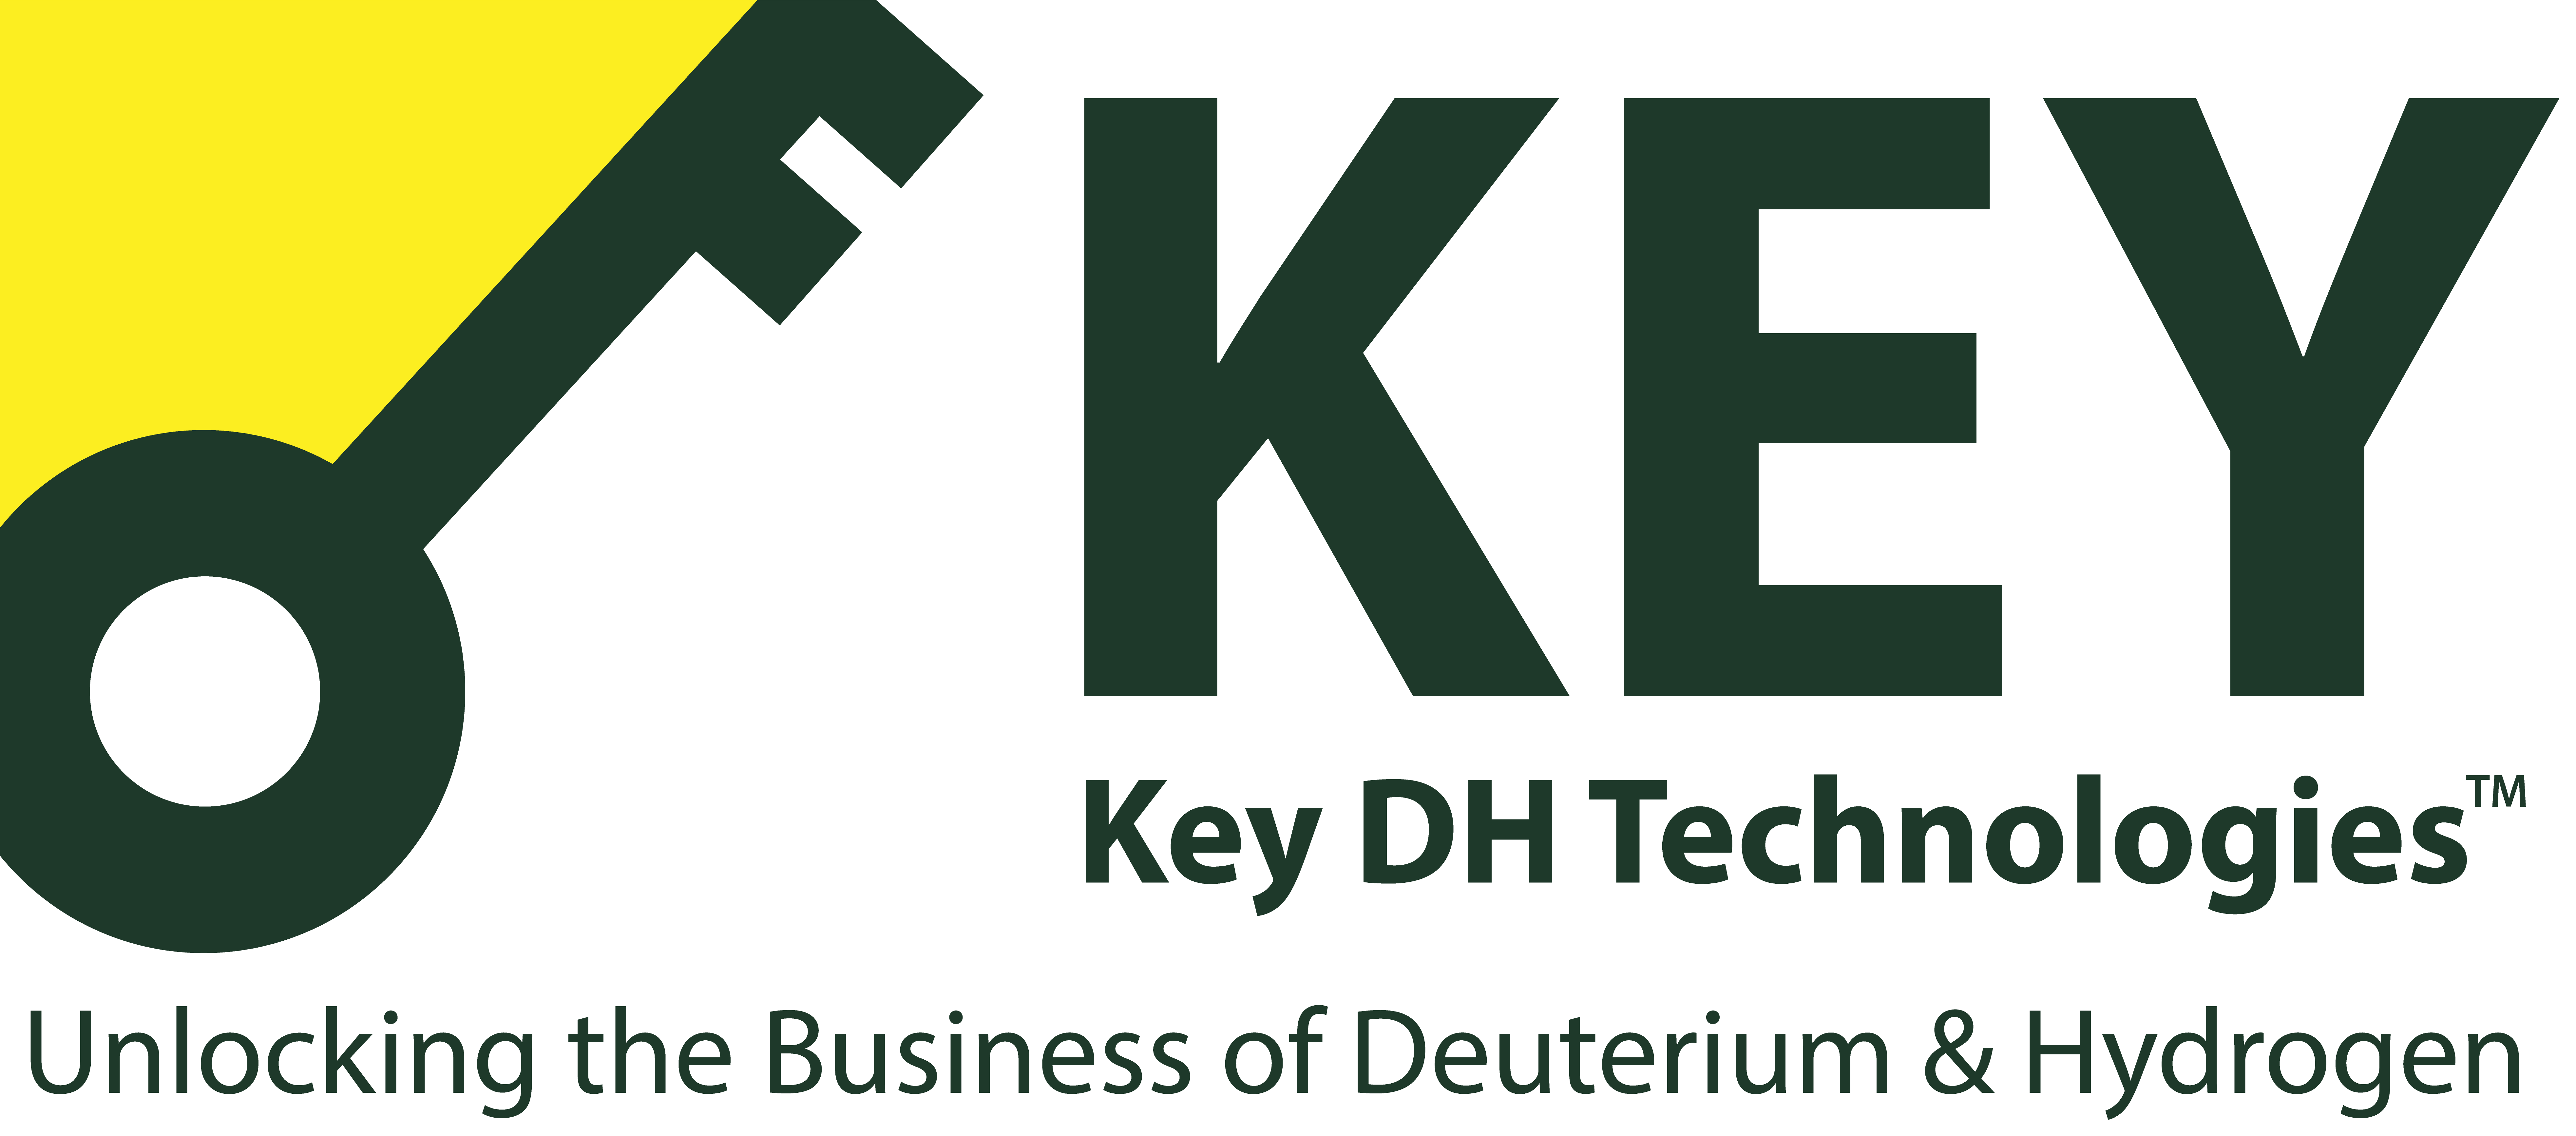 Key DH Technologies Inc., Wednesday, December 8, 2021, Press release picture